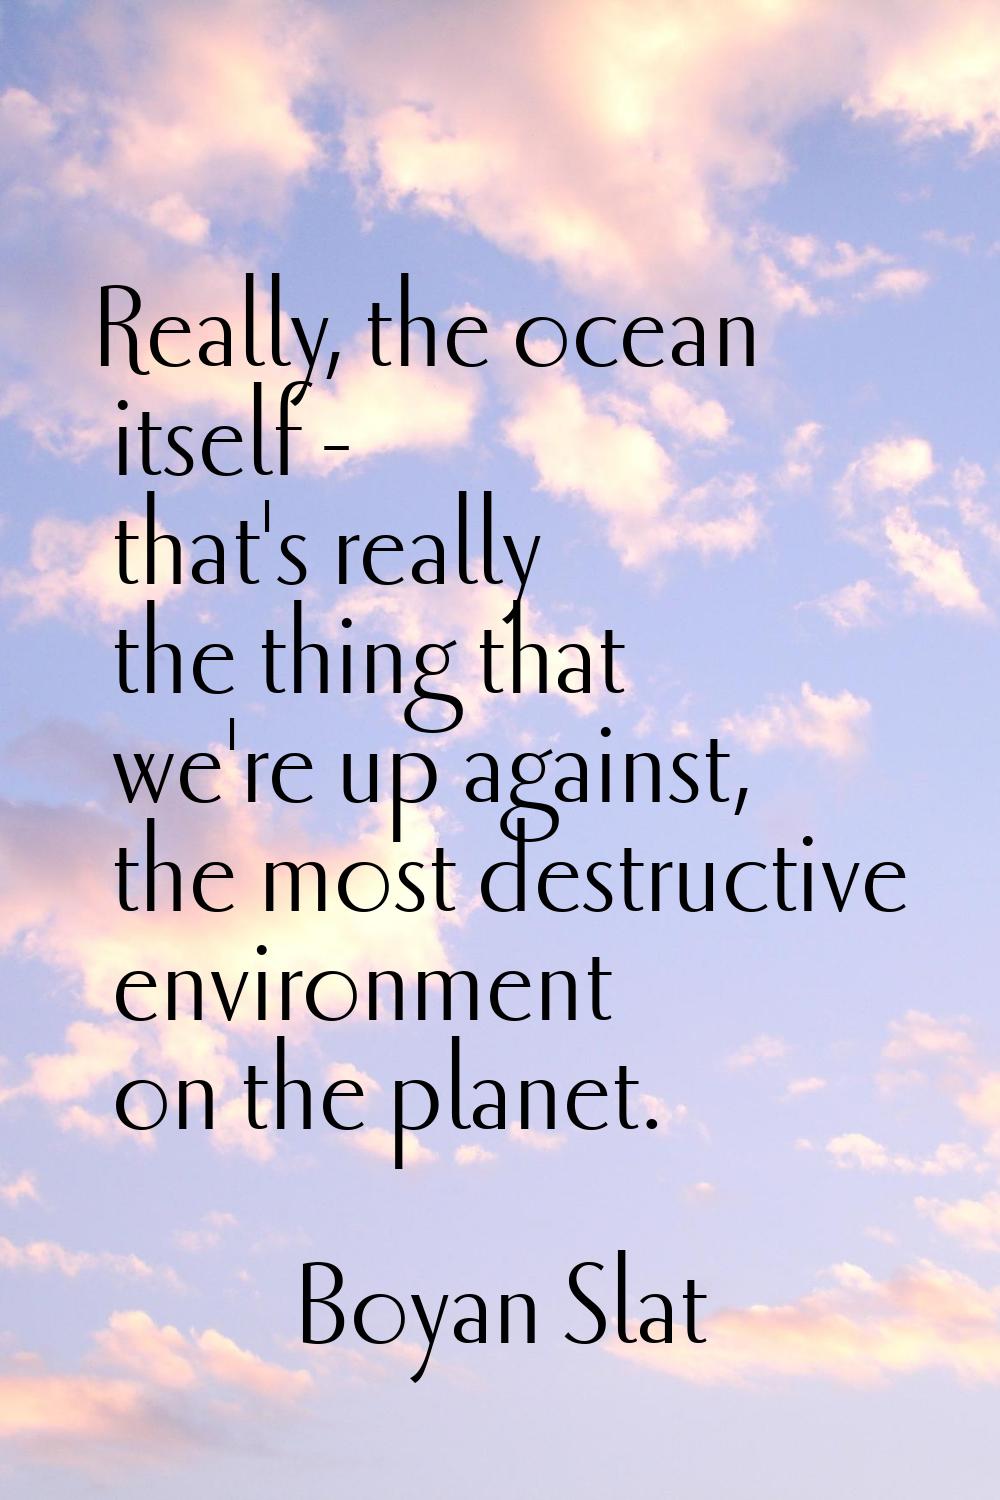 Really, the ocean itself - that's really the thing that we're up against, the most destructive envi